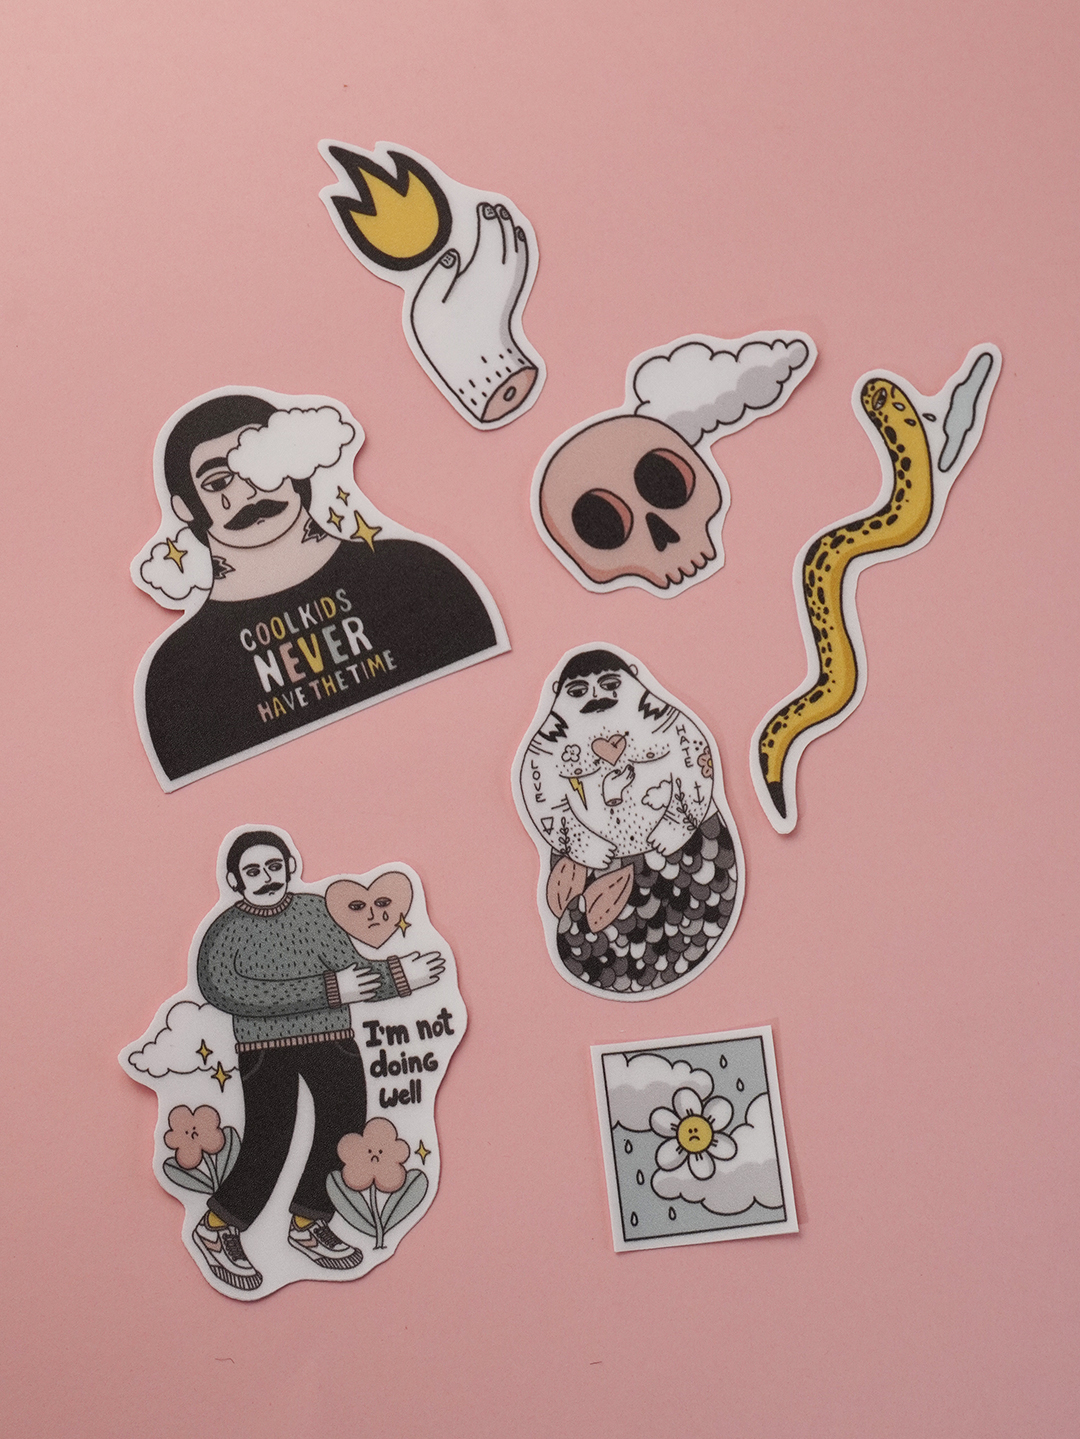 Set de stickers - Cool Kids Never Have The Time